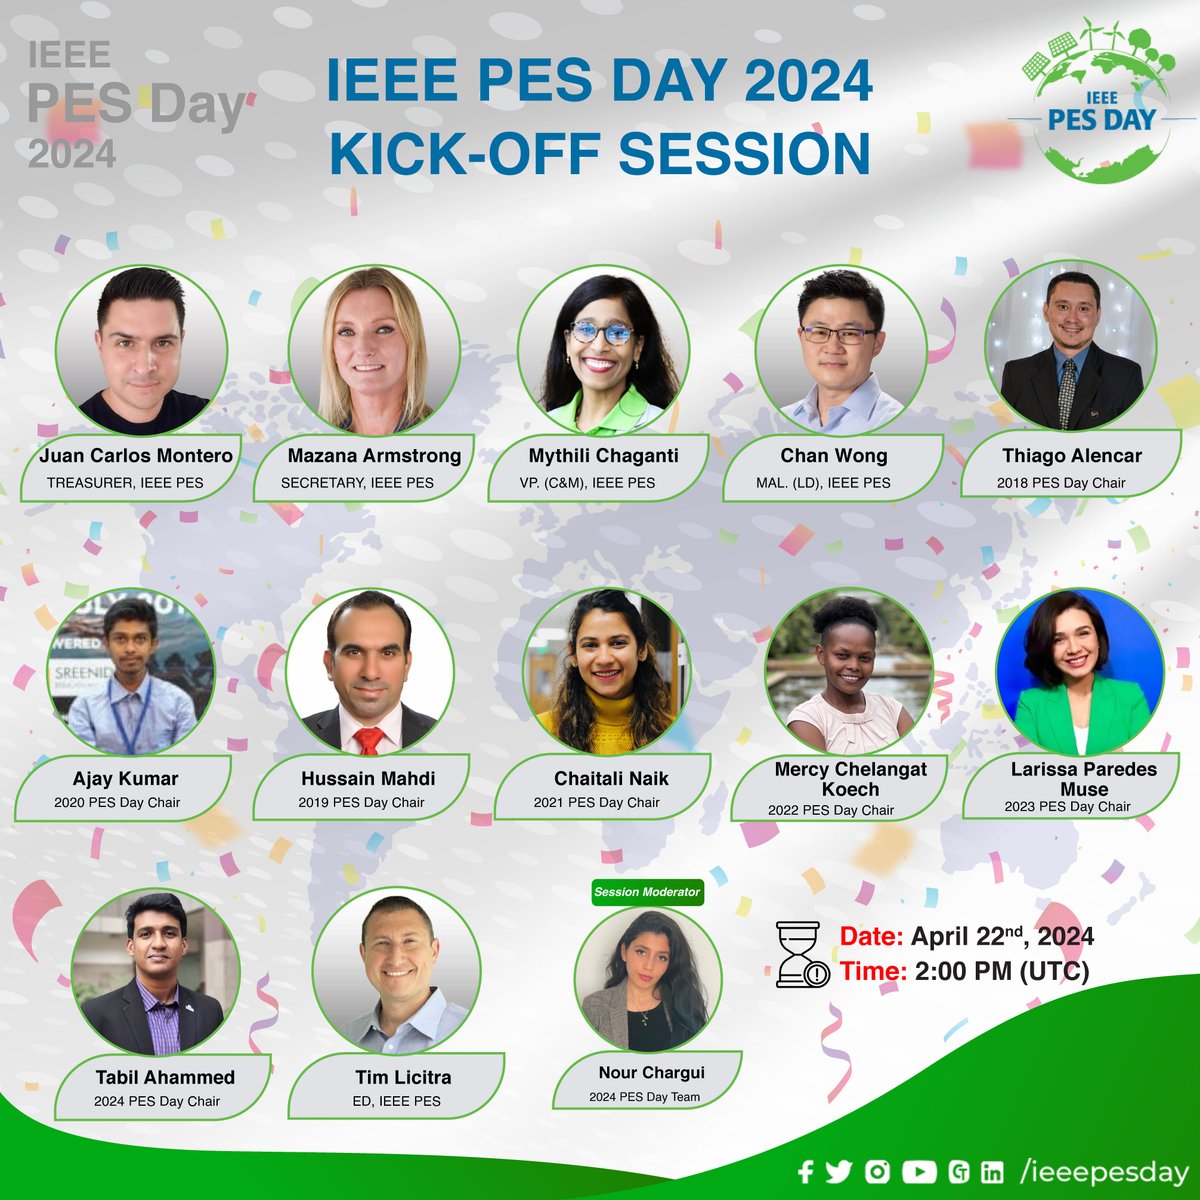 📷 Don't miss this opportunity to gain insights and kickstart your journey with us!
#PESDay2024 #IEEE #EnergyInnovation#EmpoweringInnovation
#ElectricMobility